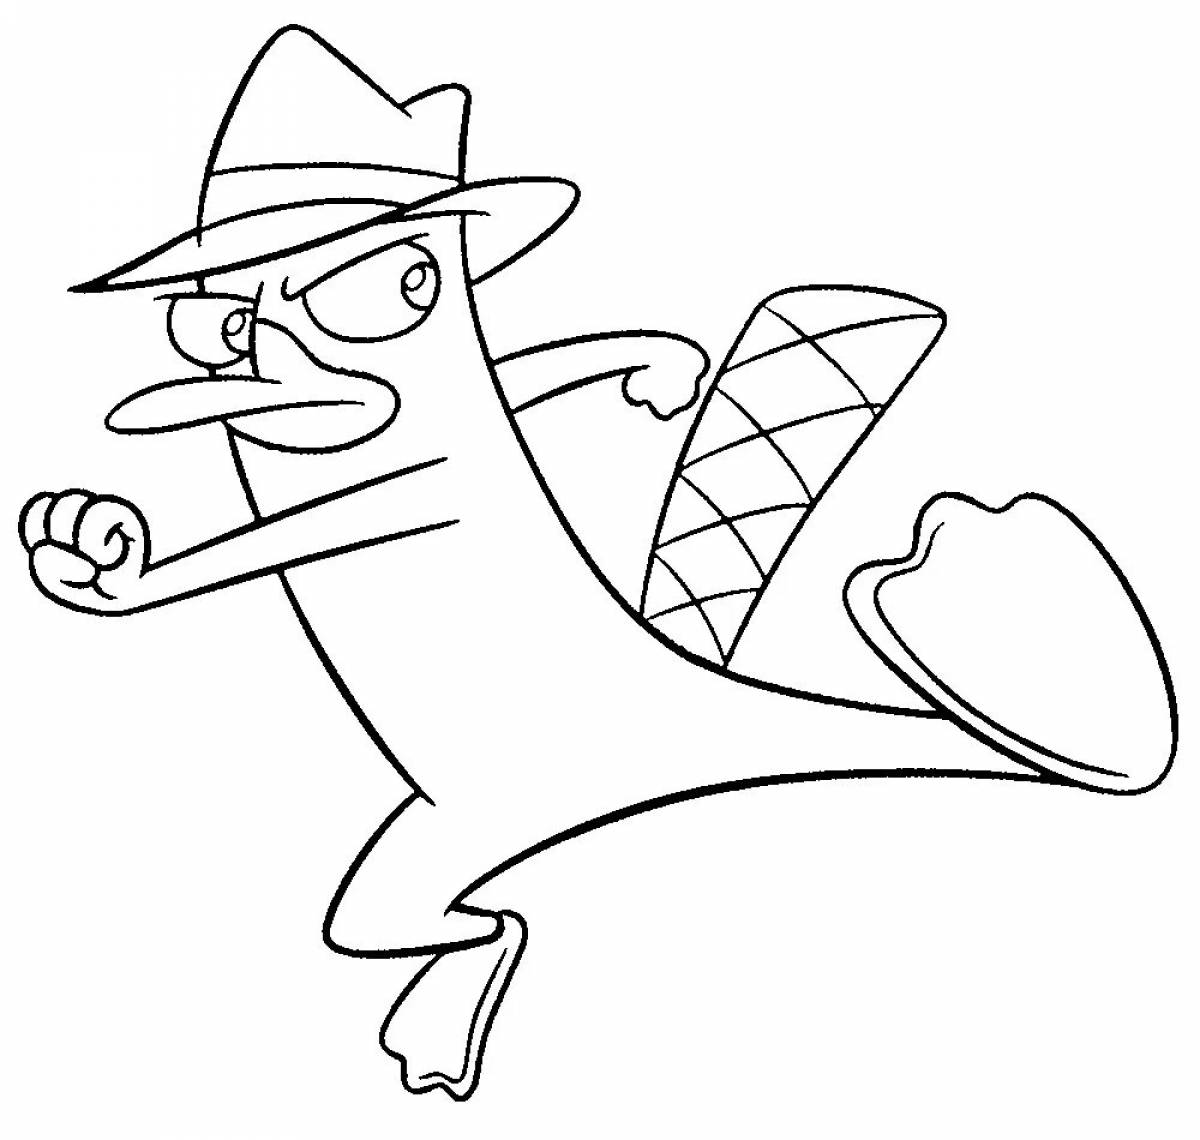 Coloring book shiny perry platypus